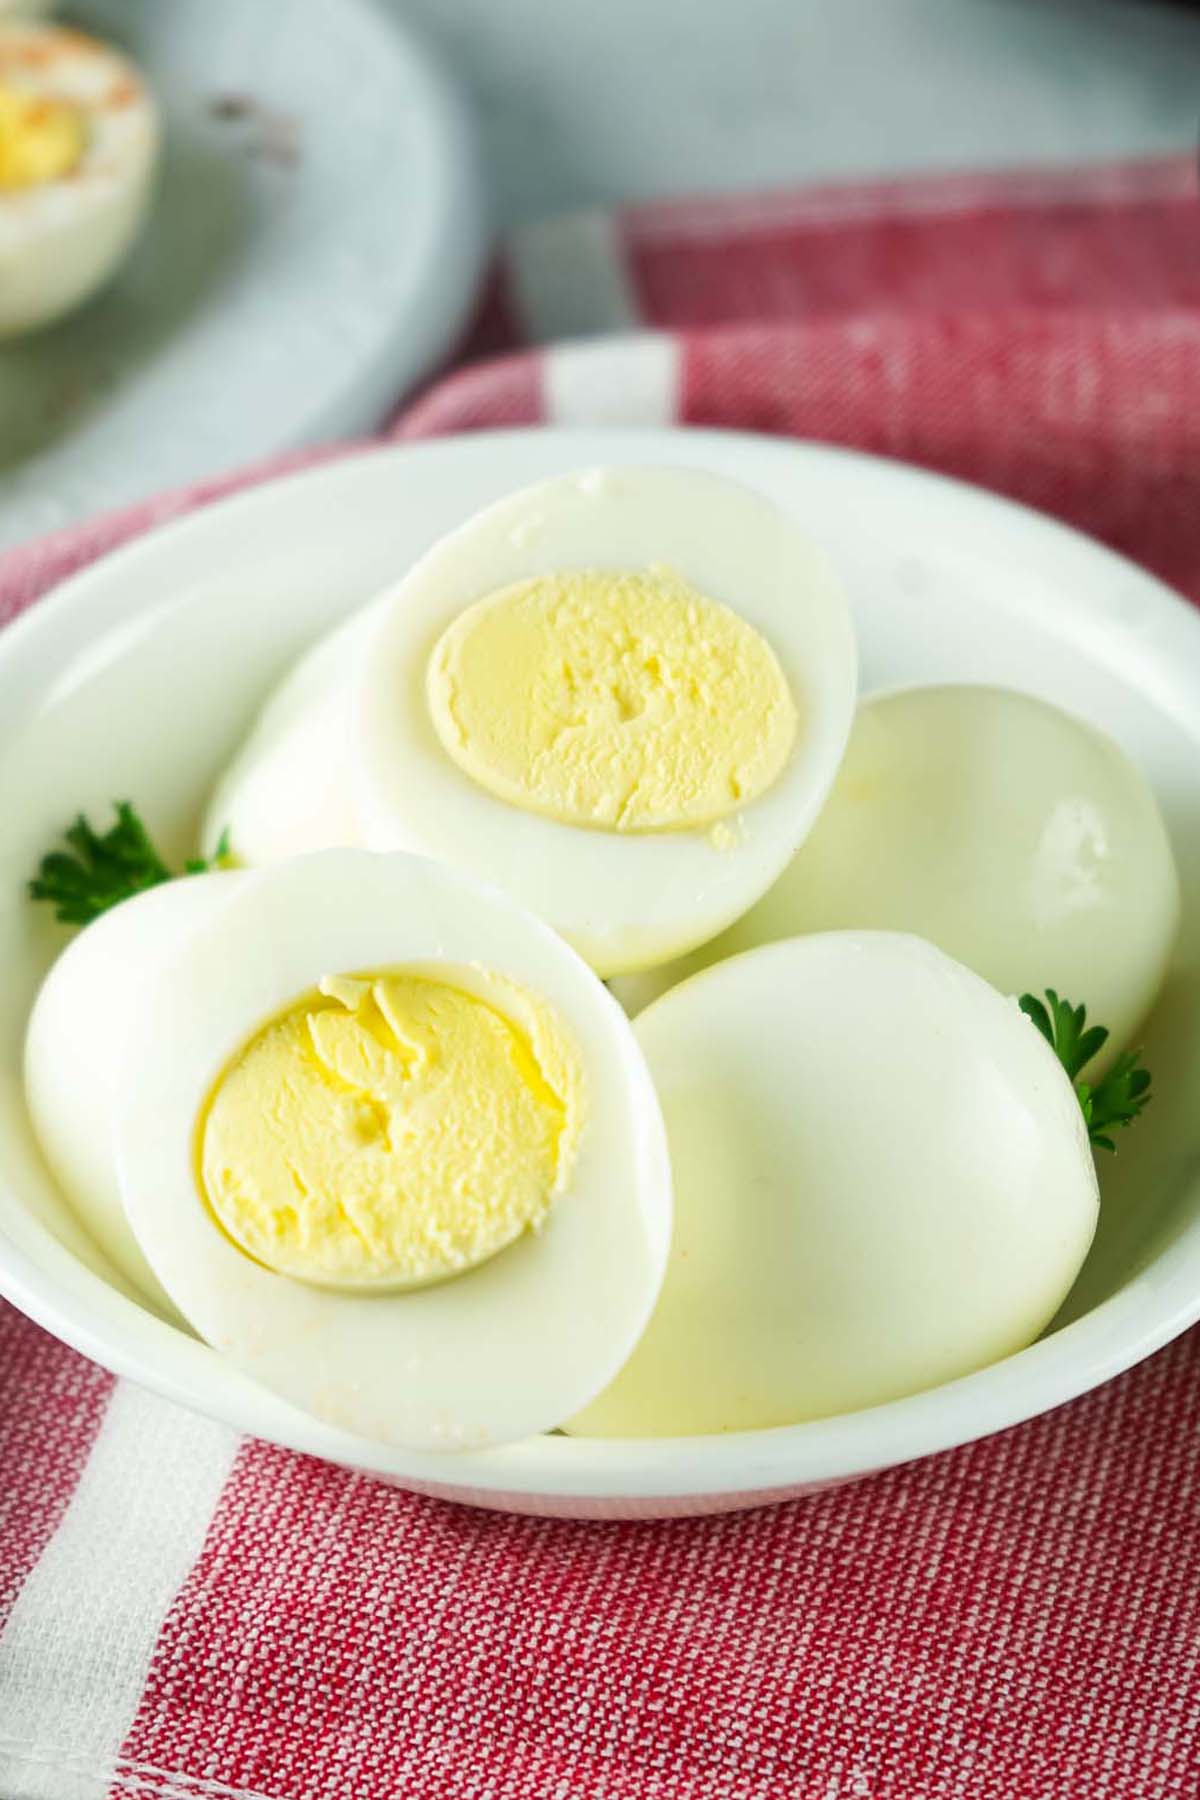 Boiled eggs in a bowl on a red towel.